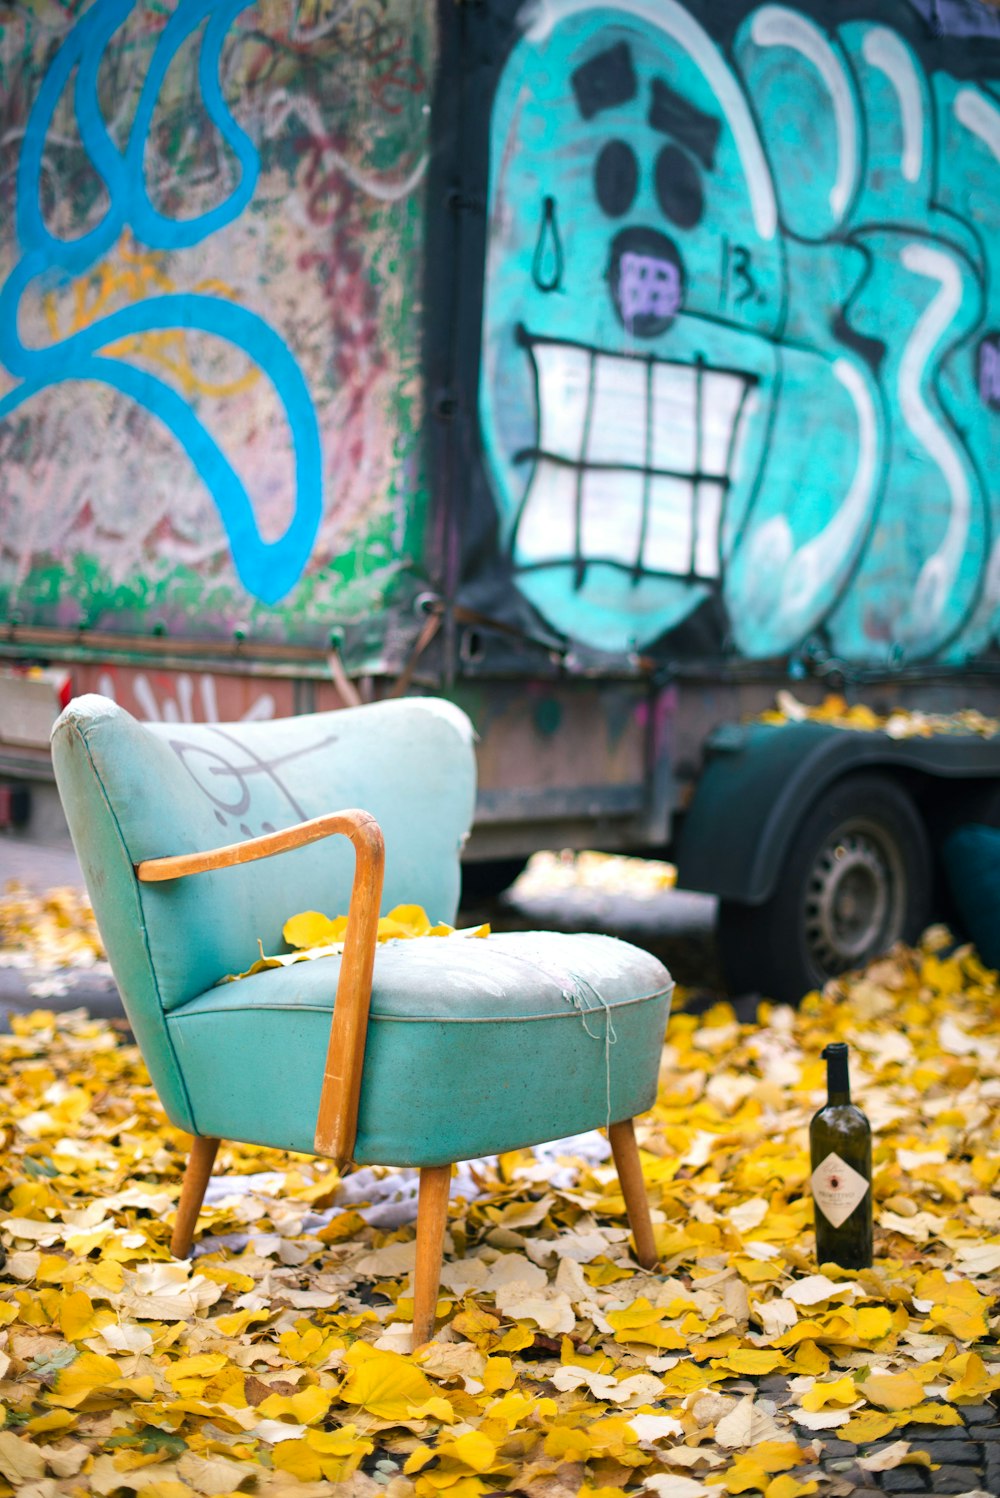 yellow and brown wooden chair beside blue and white graffiti wall